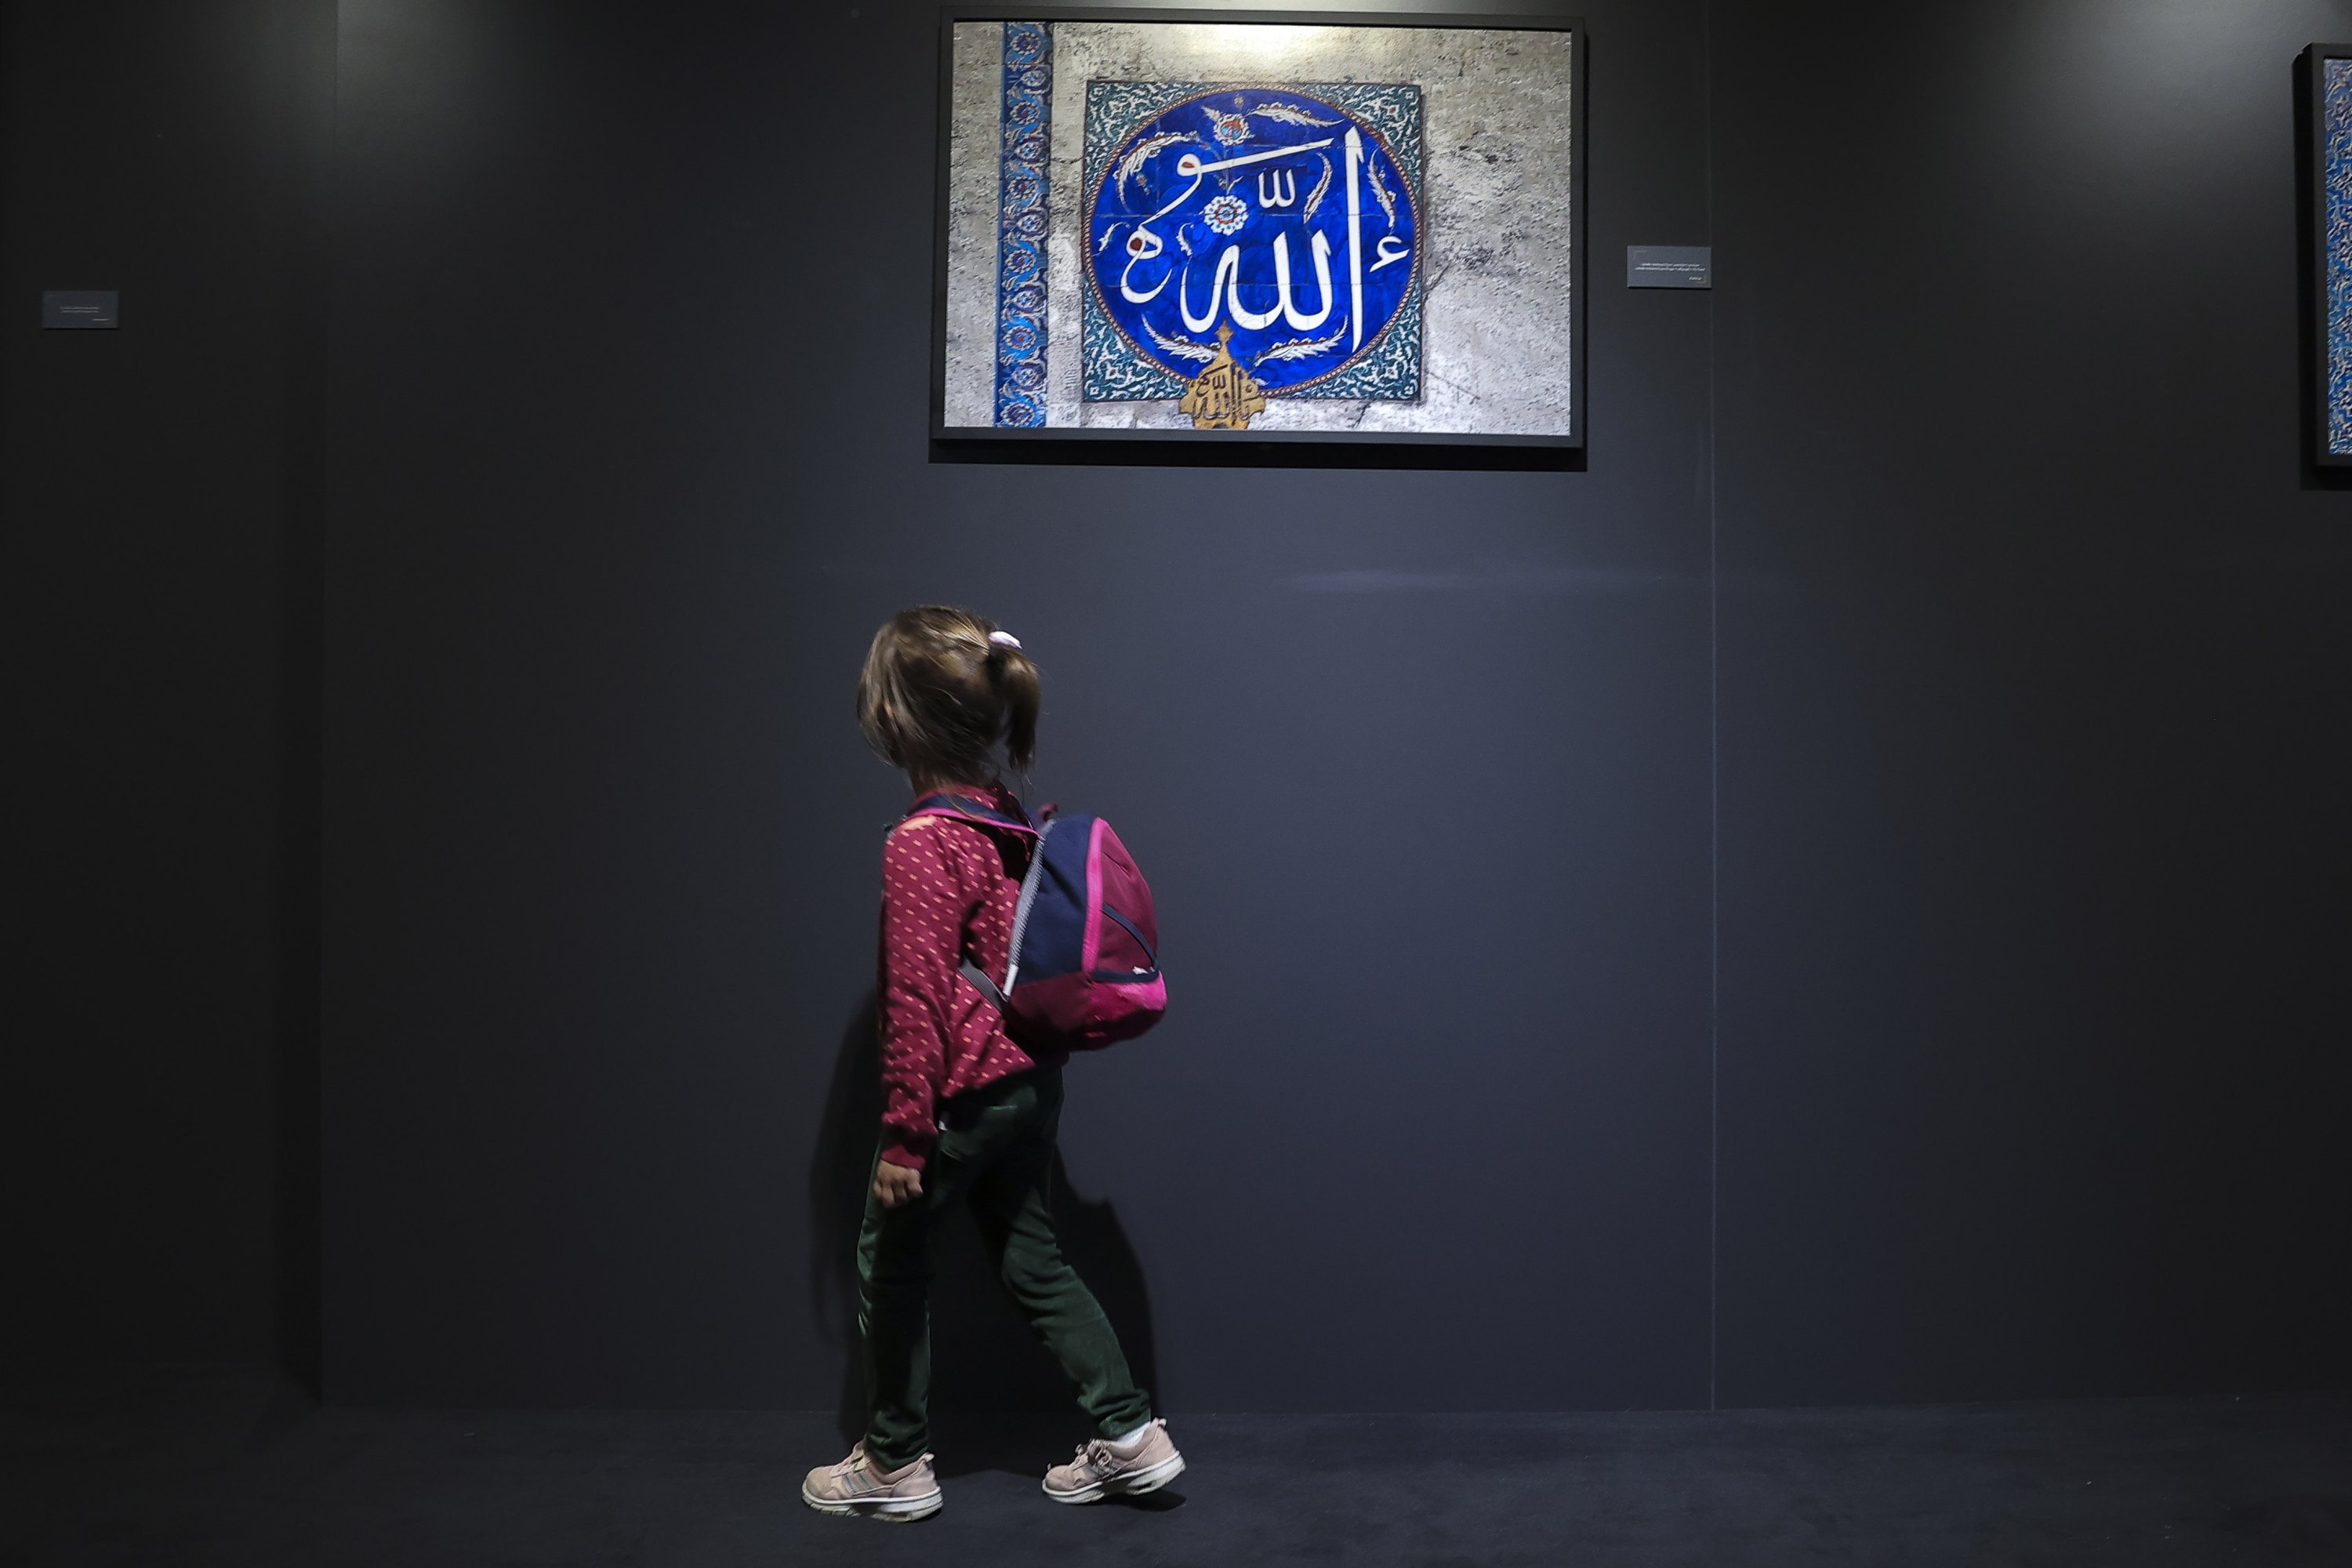 A little girl passes by a photo by Izzet Keribar in the exhibition “Heritage: Ottoman Architecture and Tile Art in Istanbul,” Museum of Turkish and Islamic Arts, Istanbul, Turkey, Oct. 2, 2021. (AA Photo)